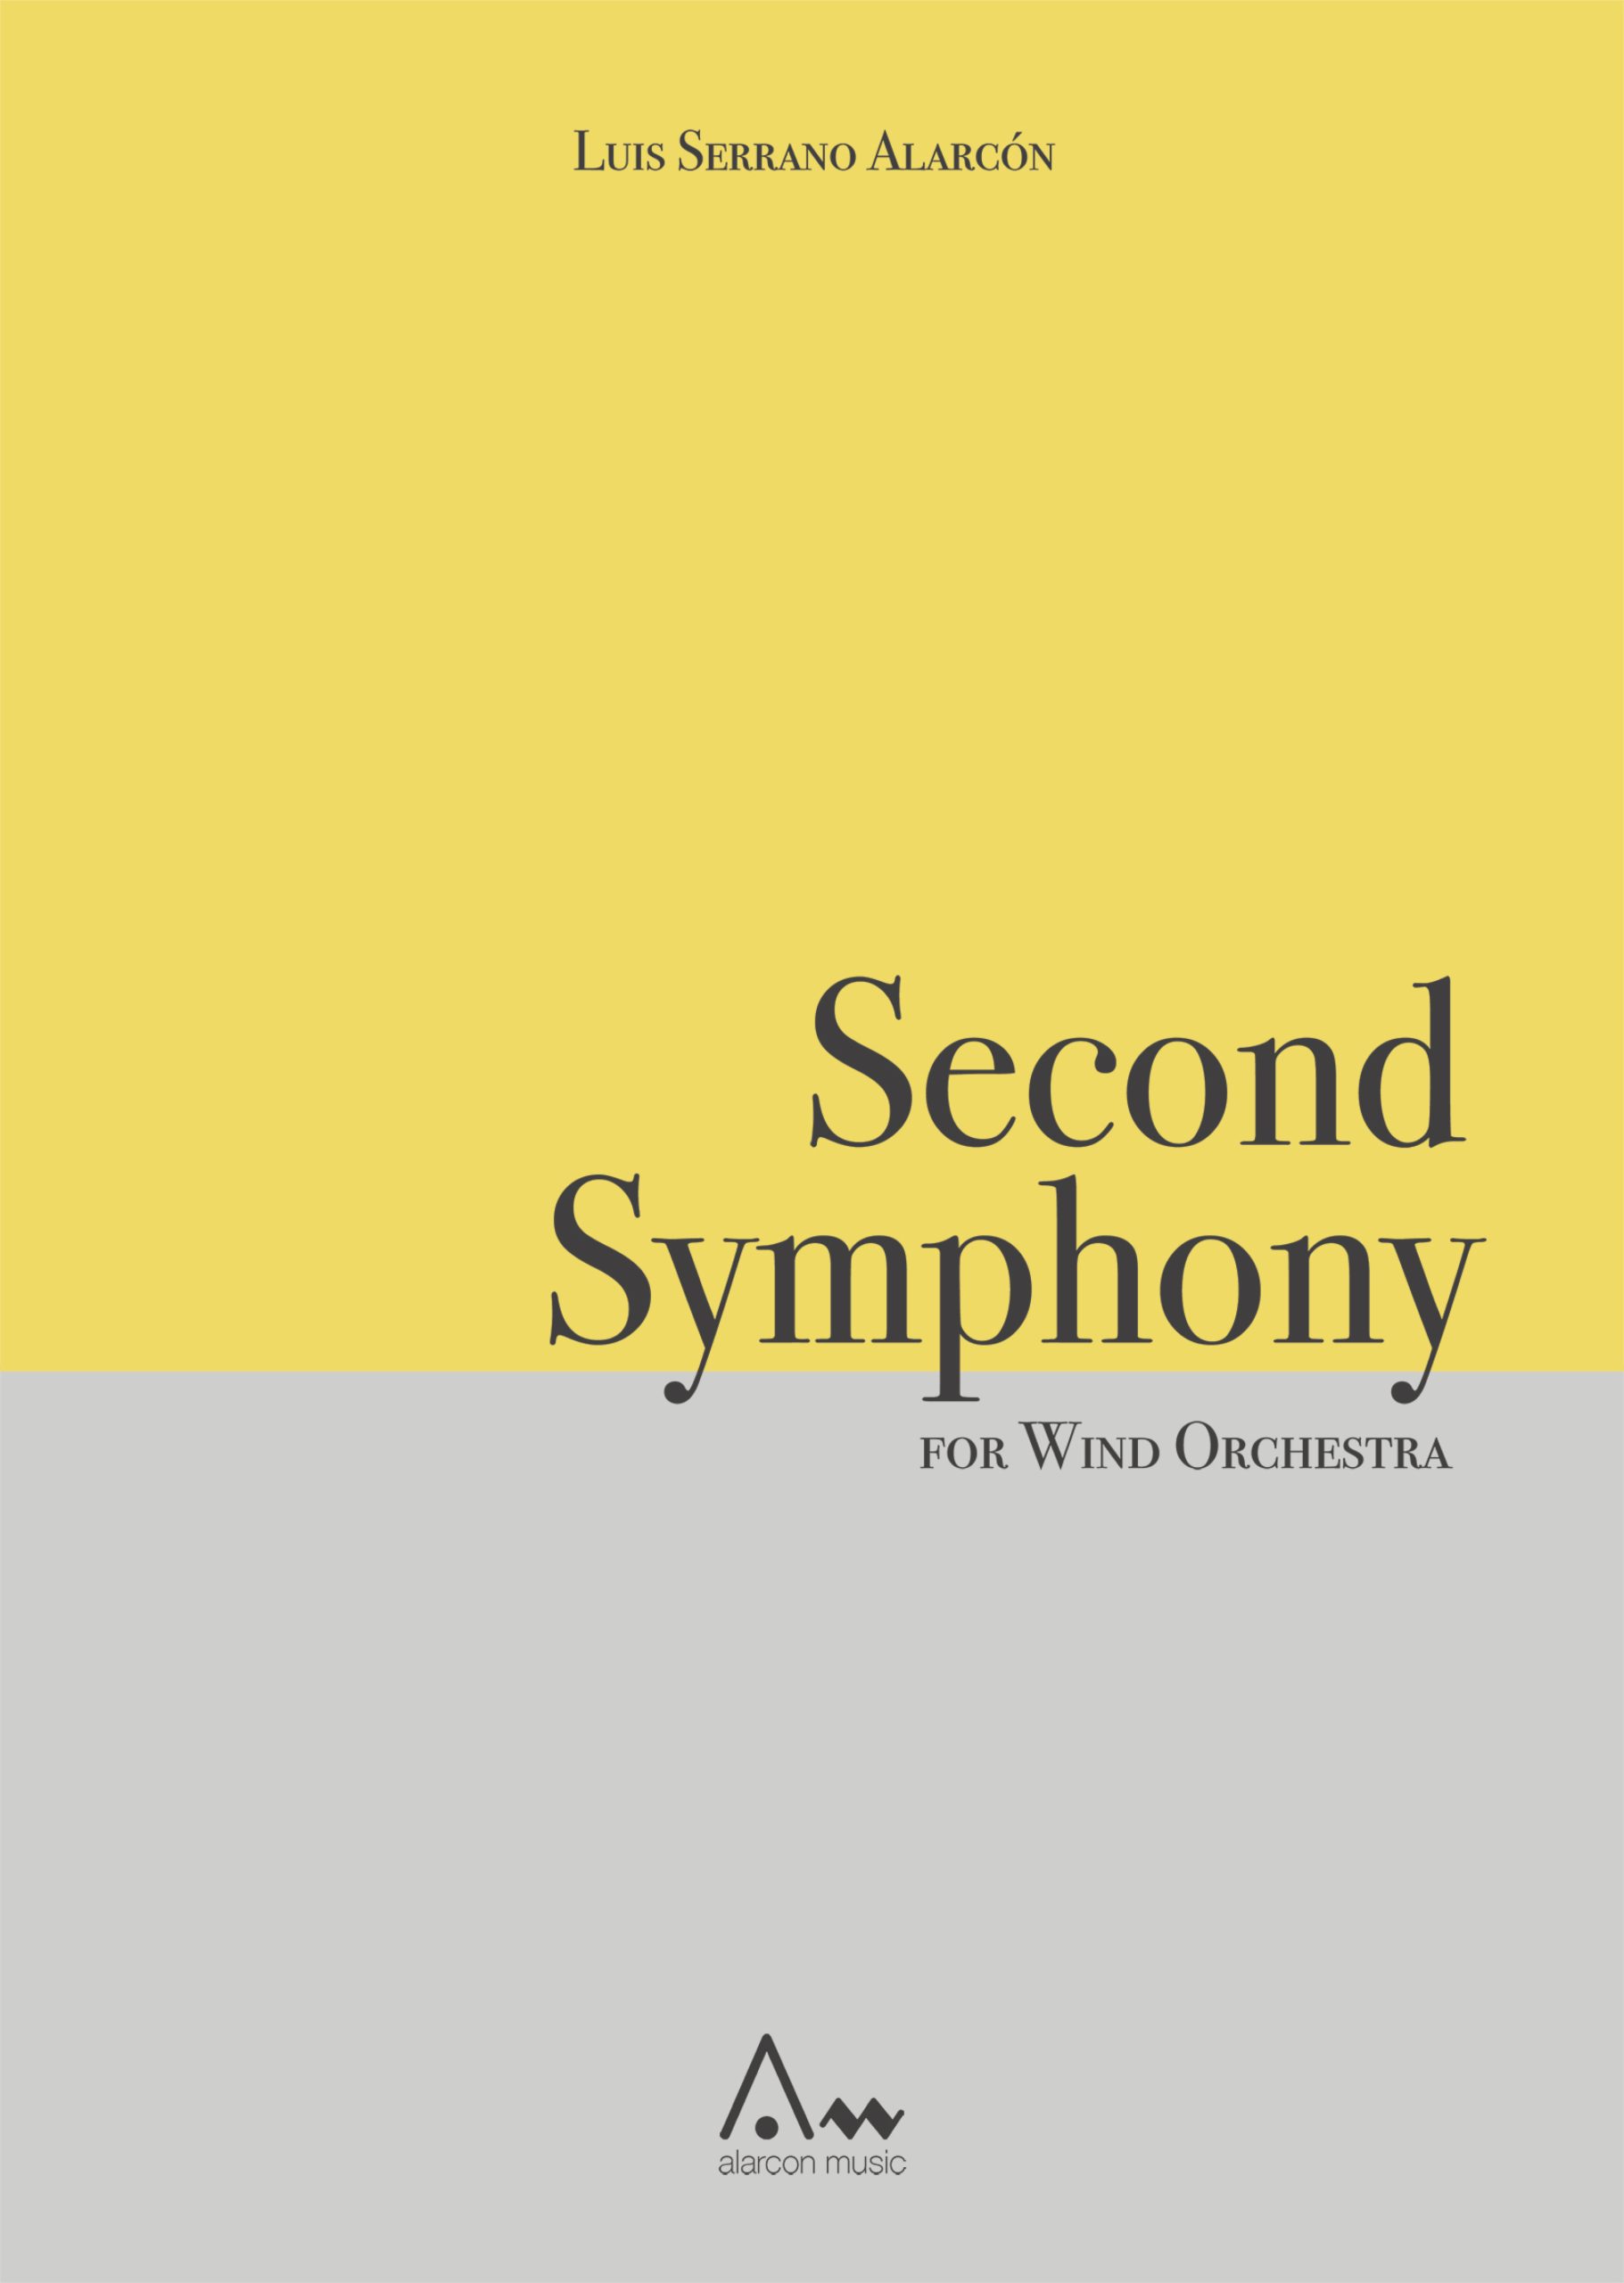 Second Symphony for Wind Orchestra